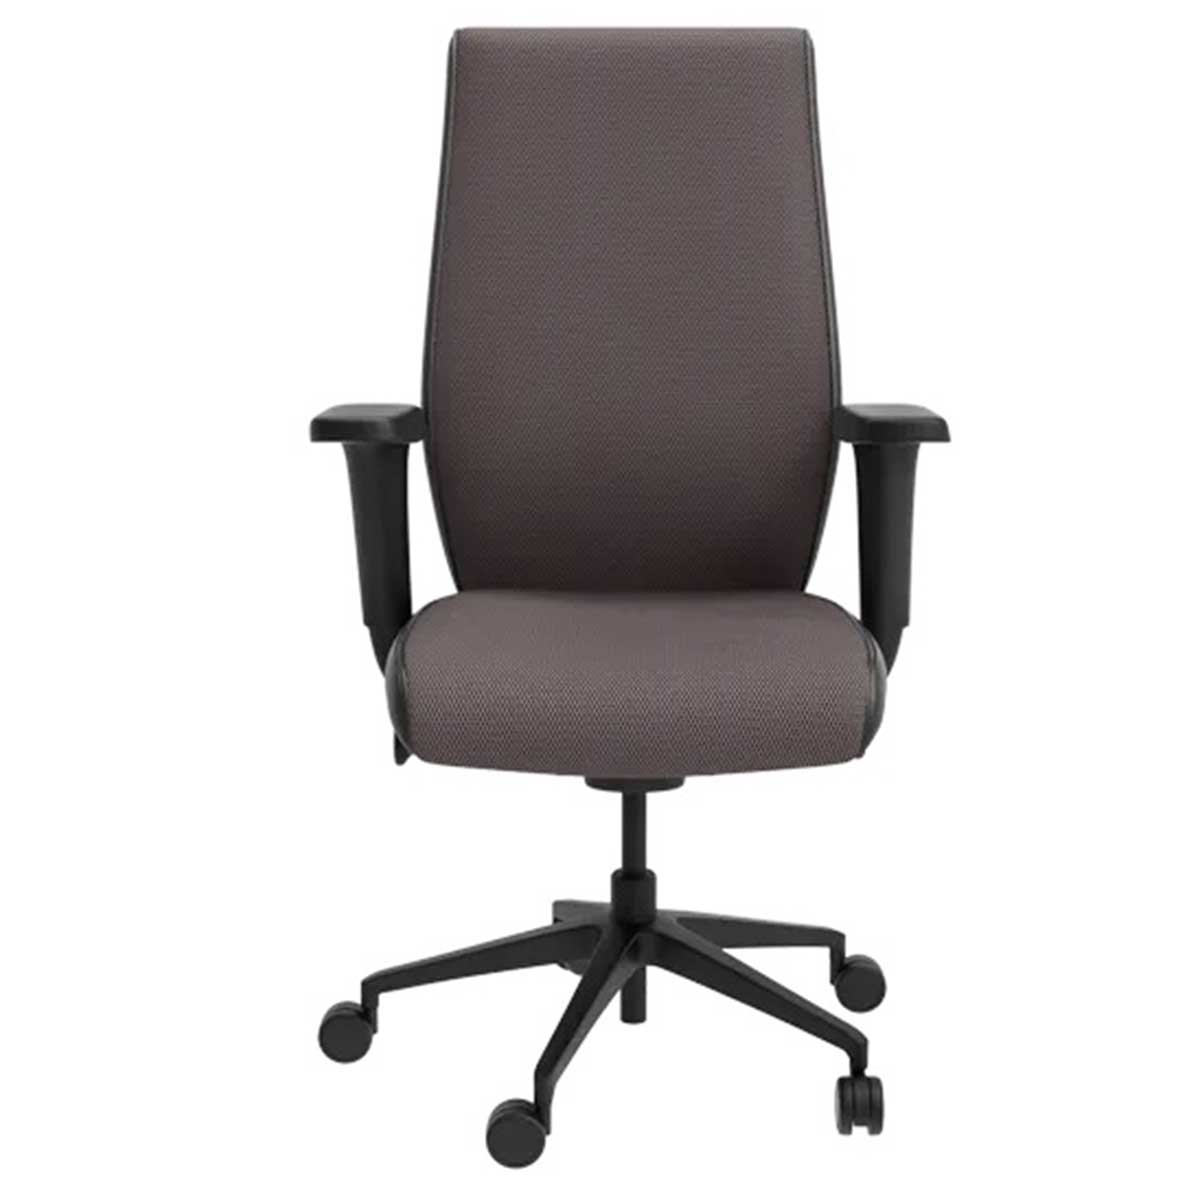 Workstation Chair Manufacturers, Suppliers in Noida Sector 44